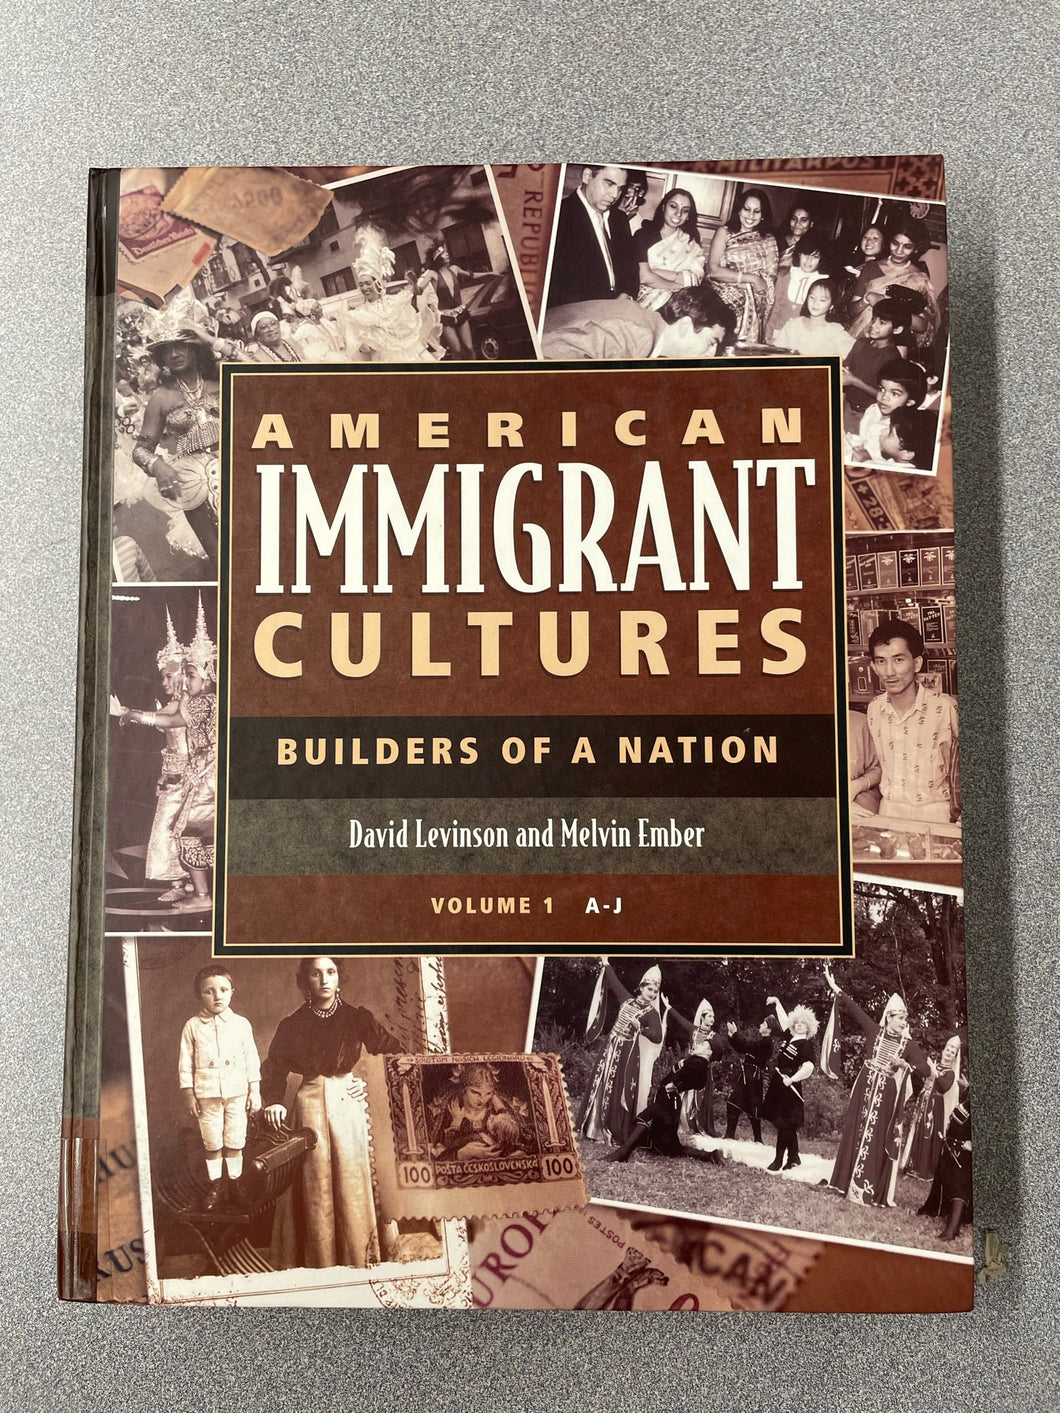 American Immigrant Cultures: Builders of a Nation, Levinson, David and Melvin Ember, ed. [1997] SS 6/23